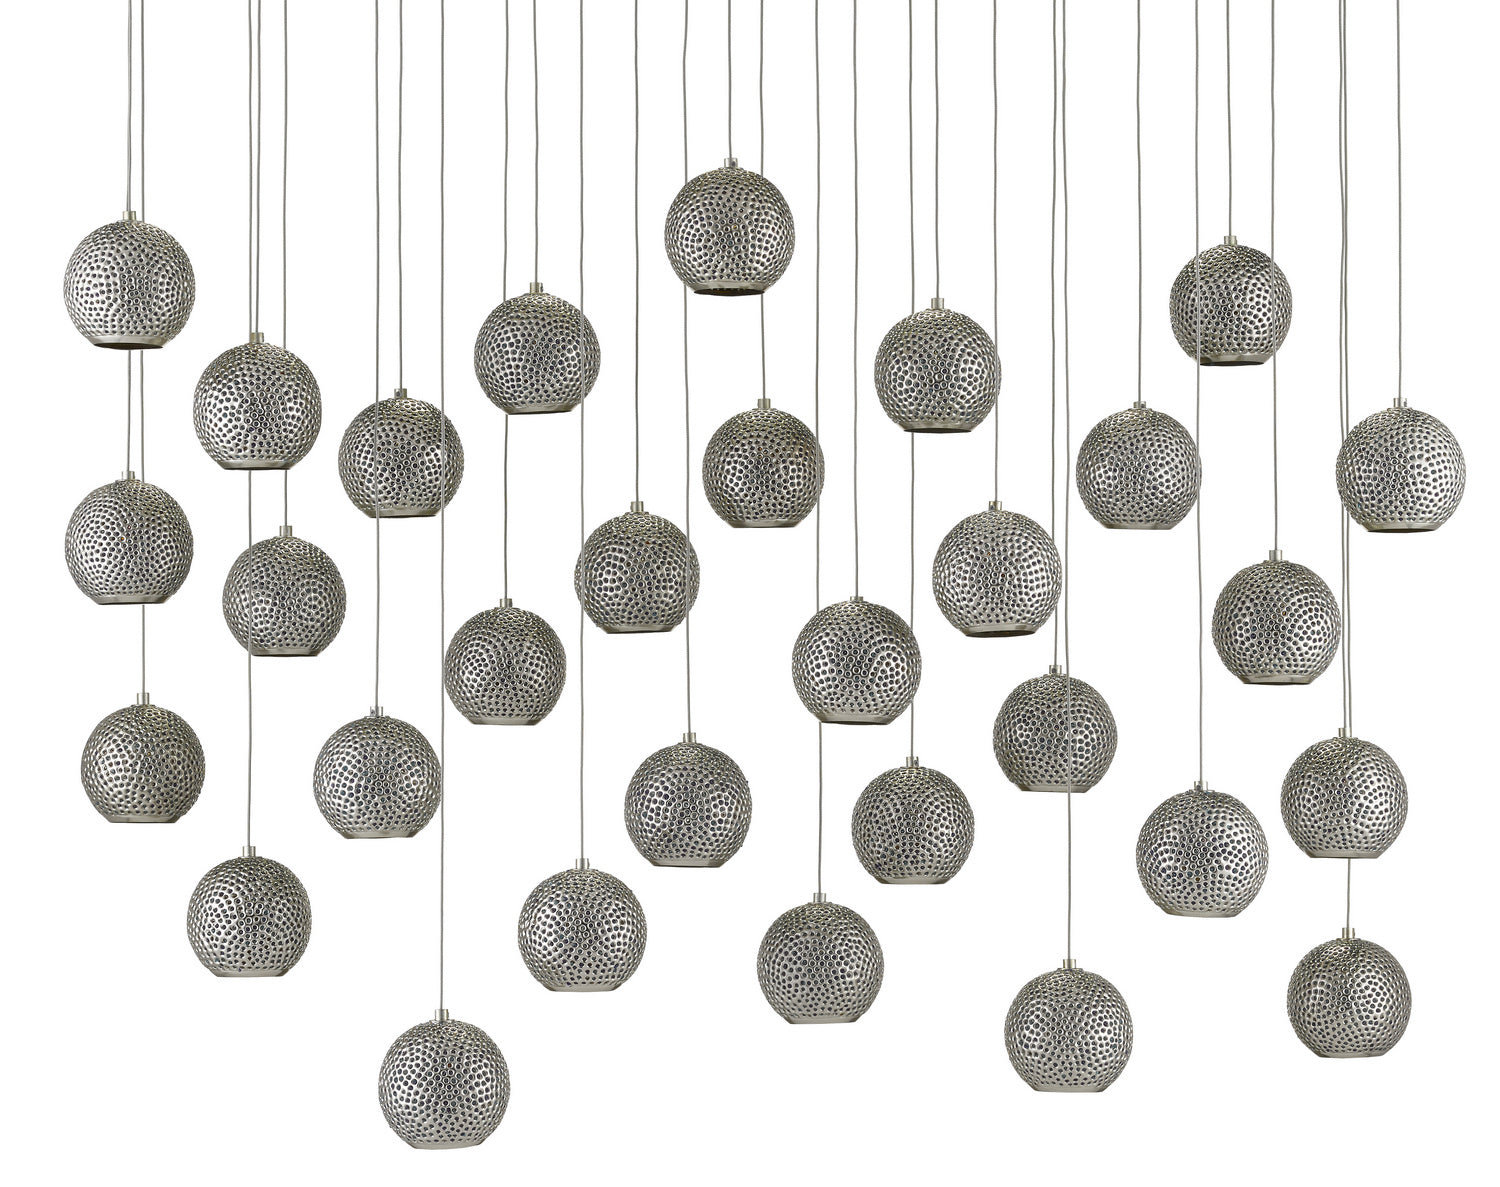 30 Light Pendant from the Giro collection in Painted Silver/Nickel/Blue finish